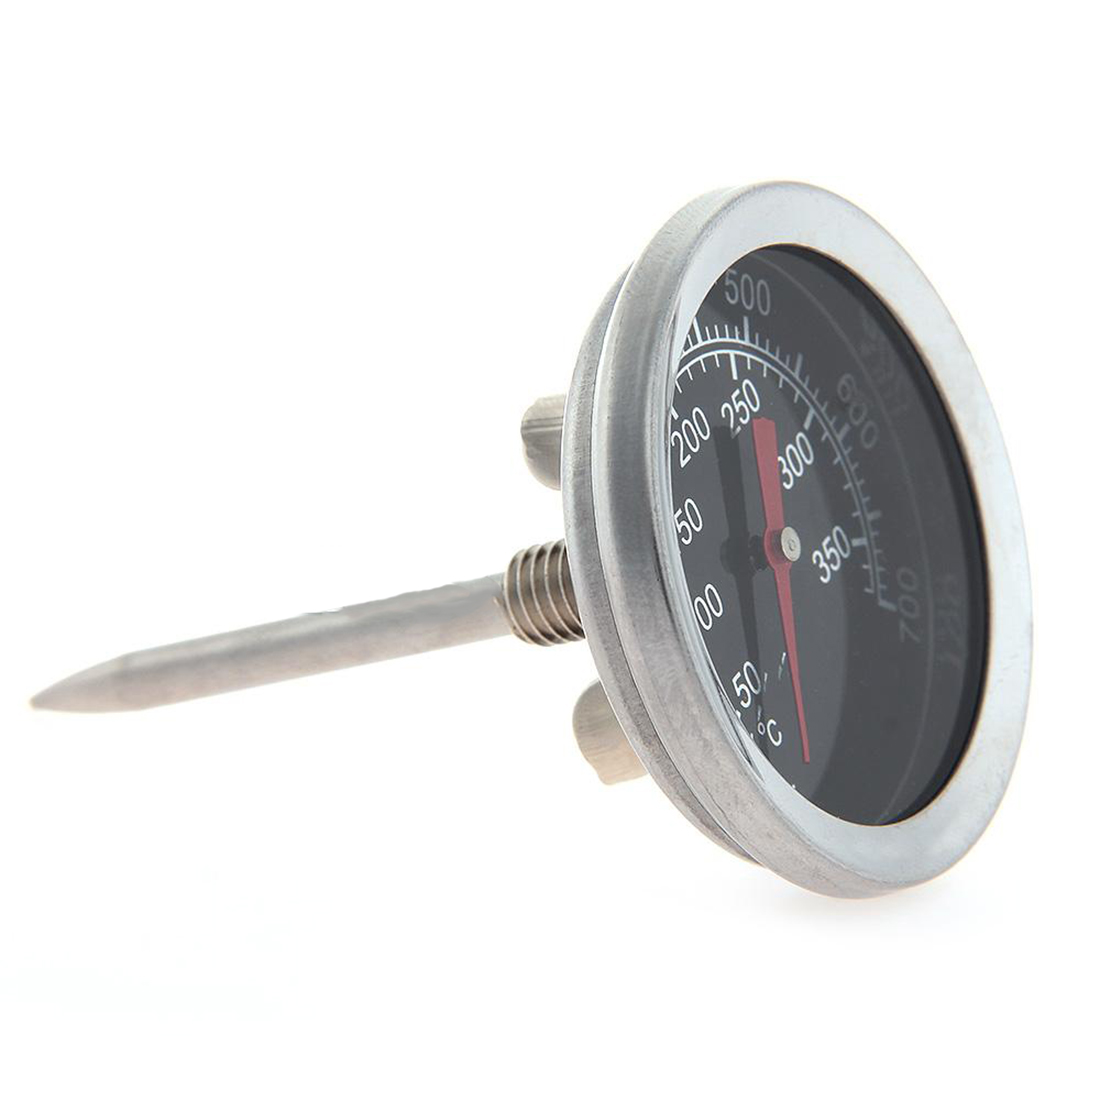 Stainless Steel Cooking Oven Fryer BBQ Barbecue Probe Thermometer Food Meat Gauge 350 Degree Centigrade